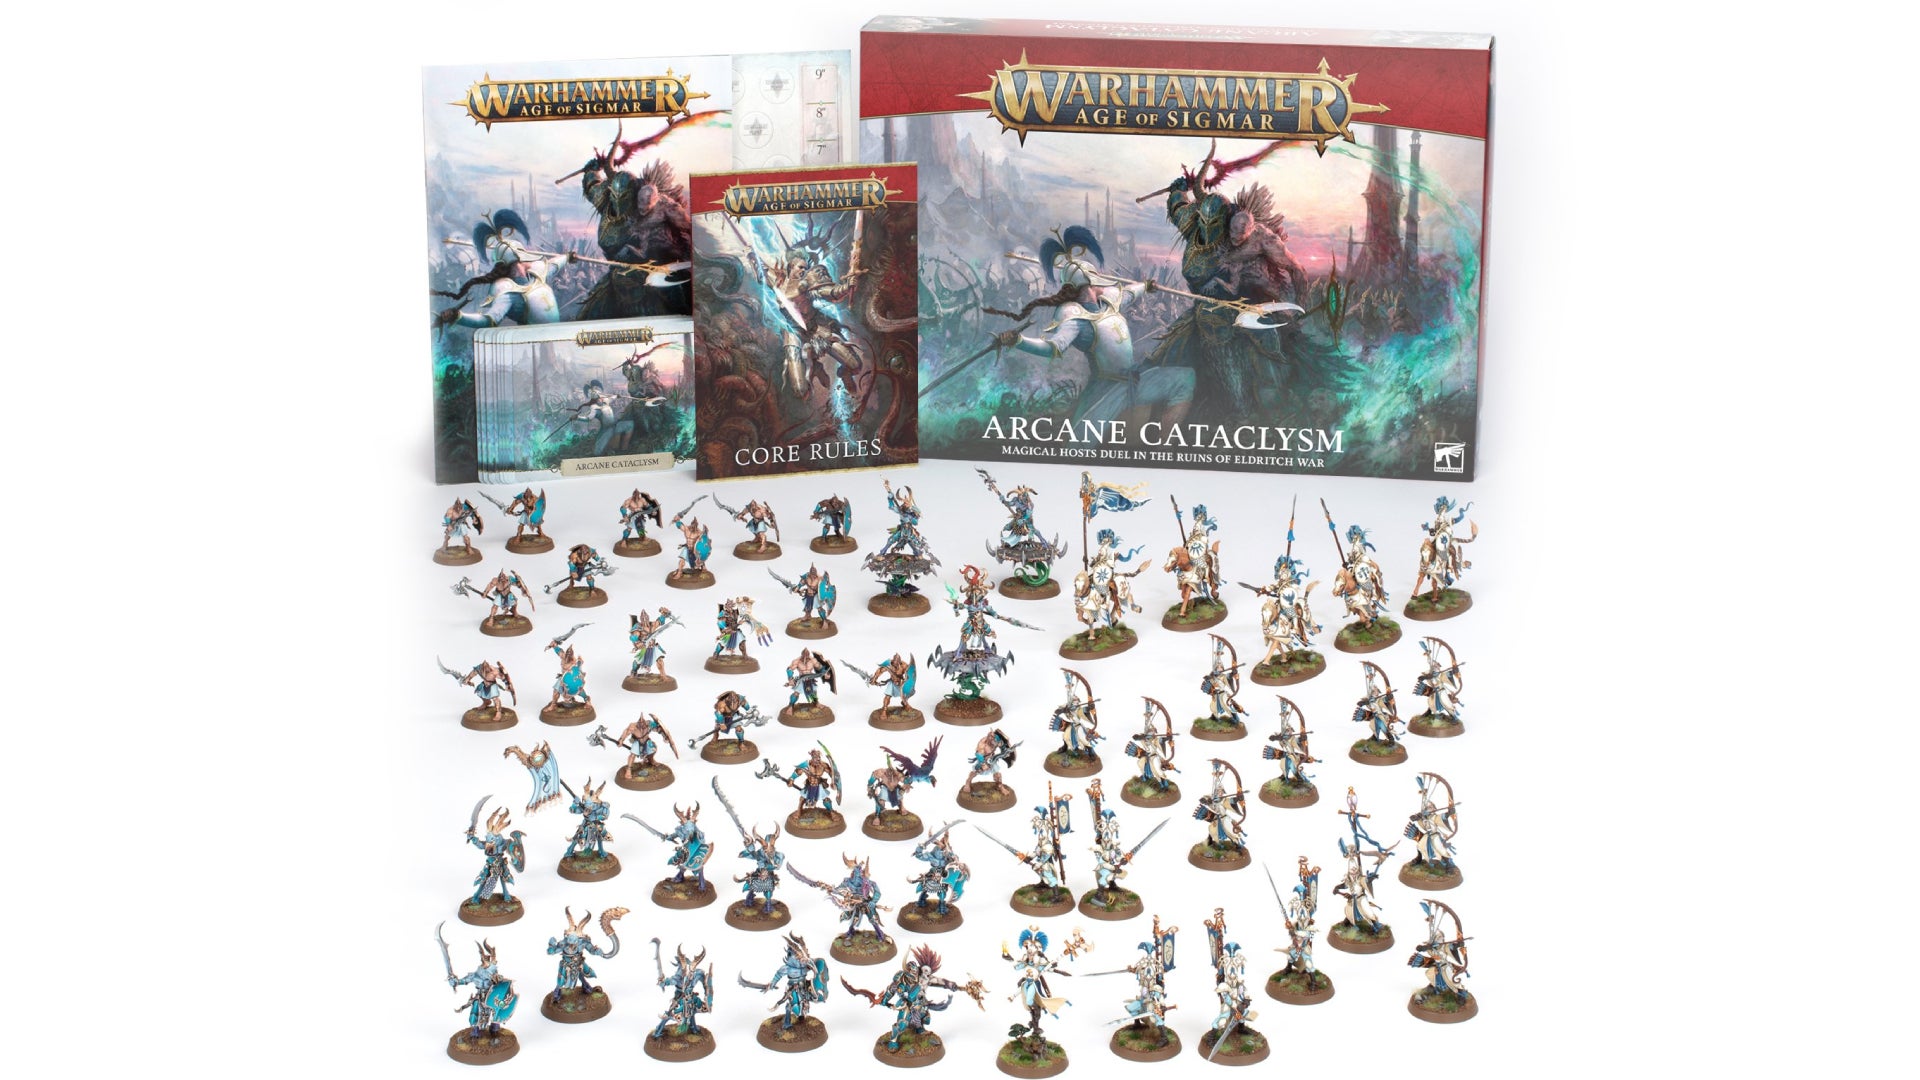 Build two Warhammer: Age of Sigmar armies for under £100